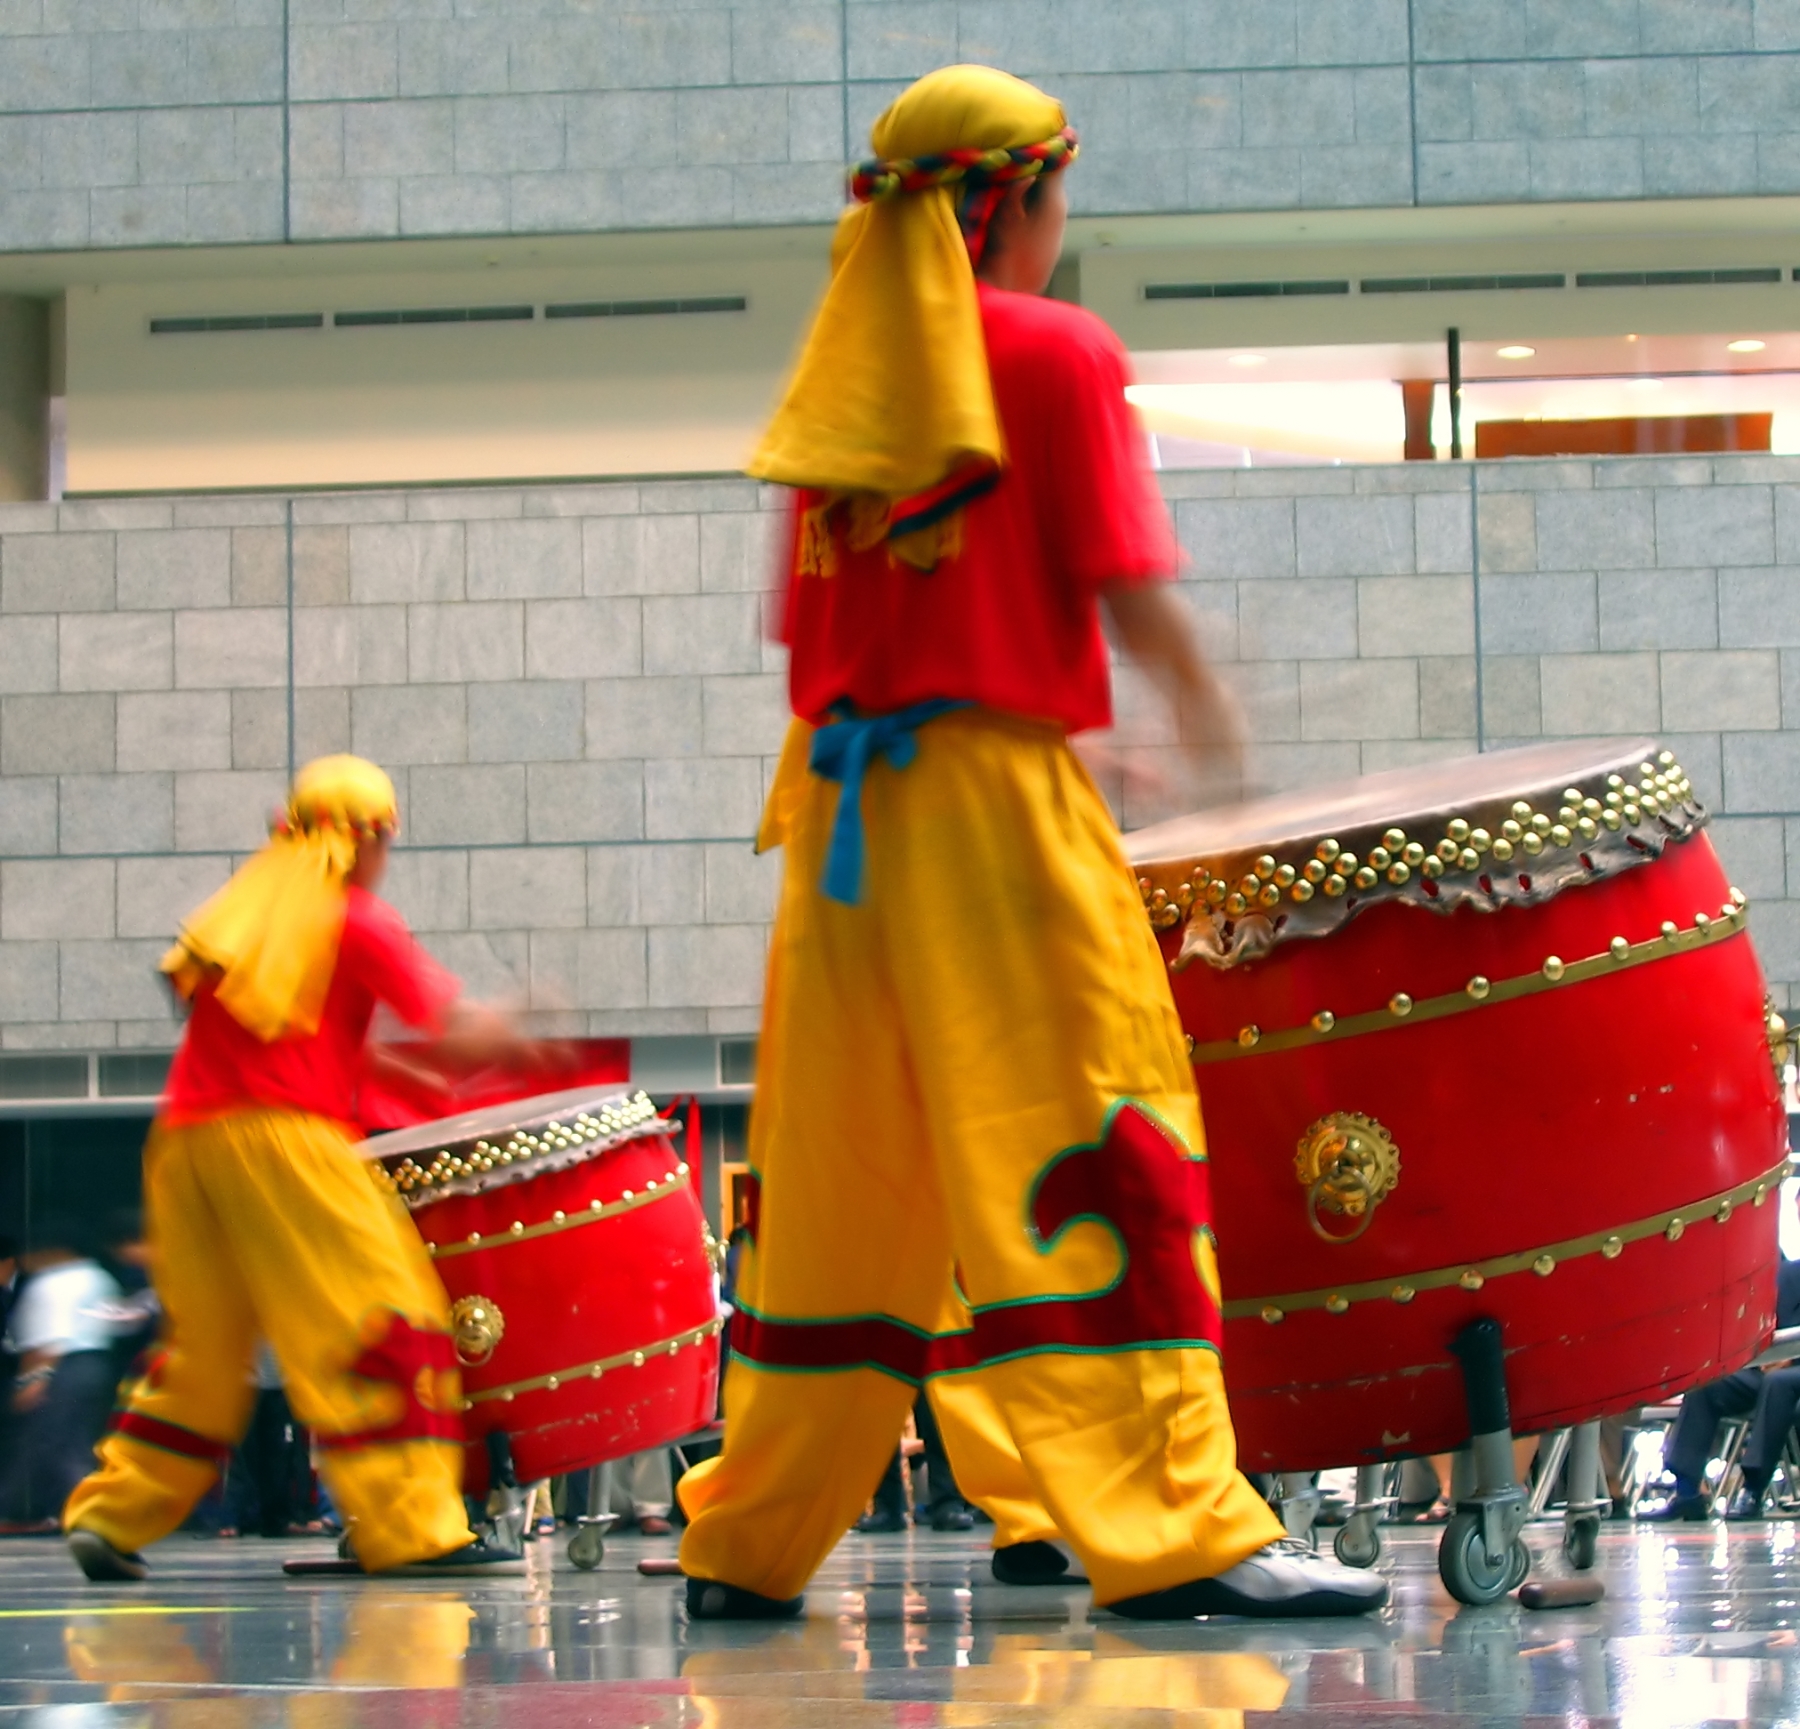 Chinese Drummers at Work, Action, Set, Percussion, Polished, HQ Photo